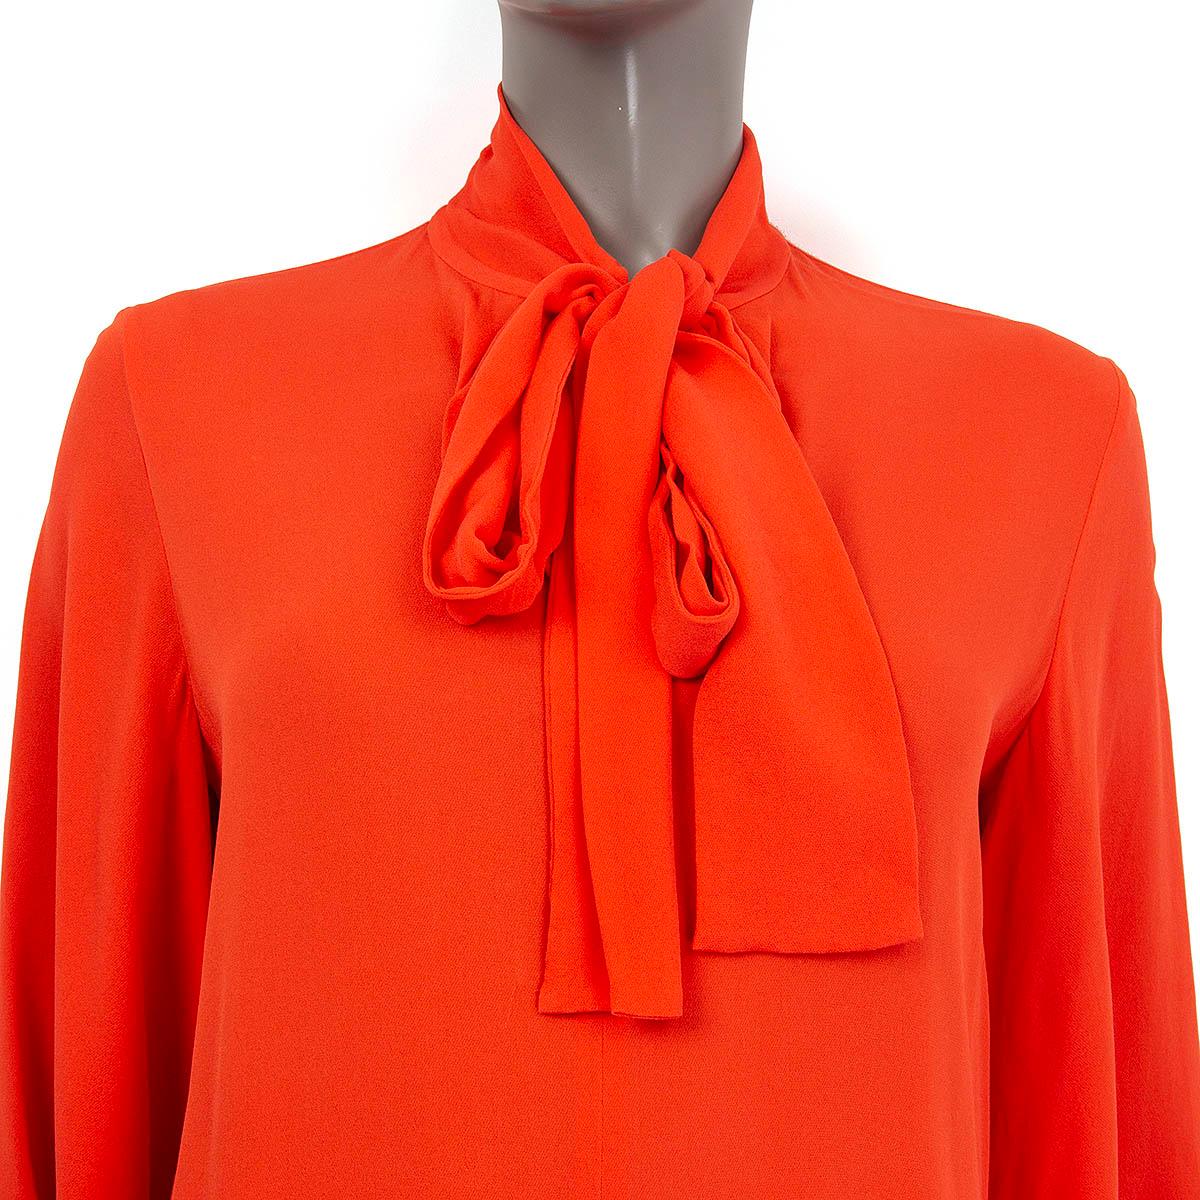 Women's VALENTINO coral red silk PUSSY BOW Batwing 3/4 Sleeve Shirt Blouse 42 M For Sale